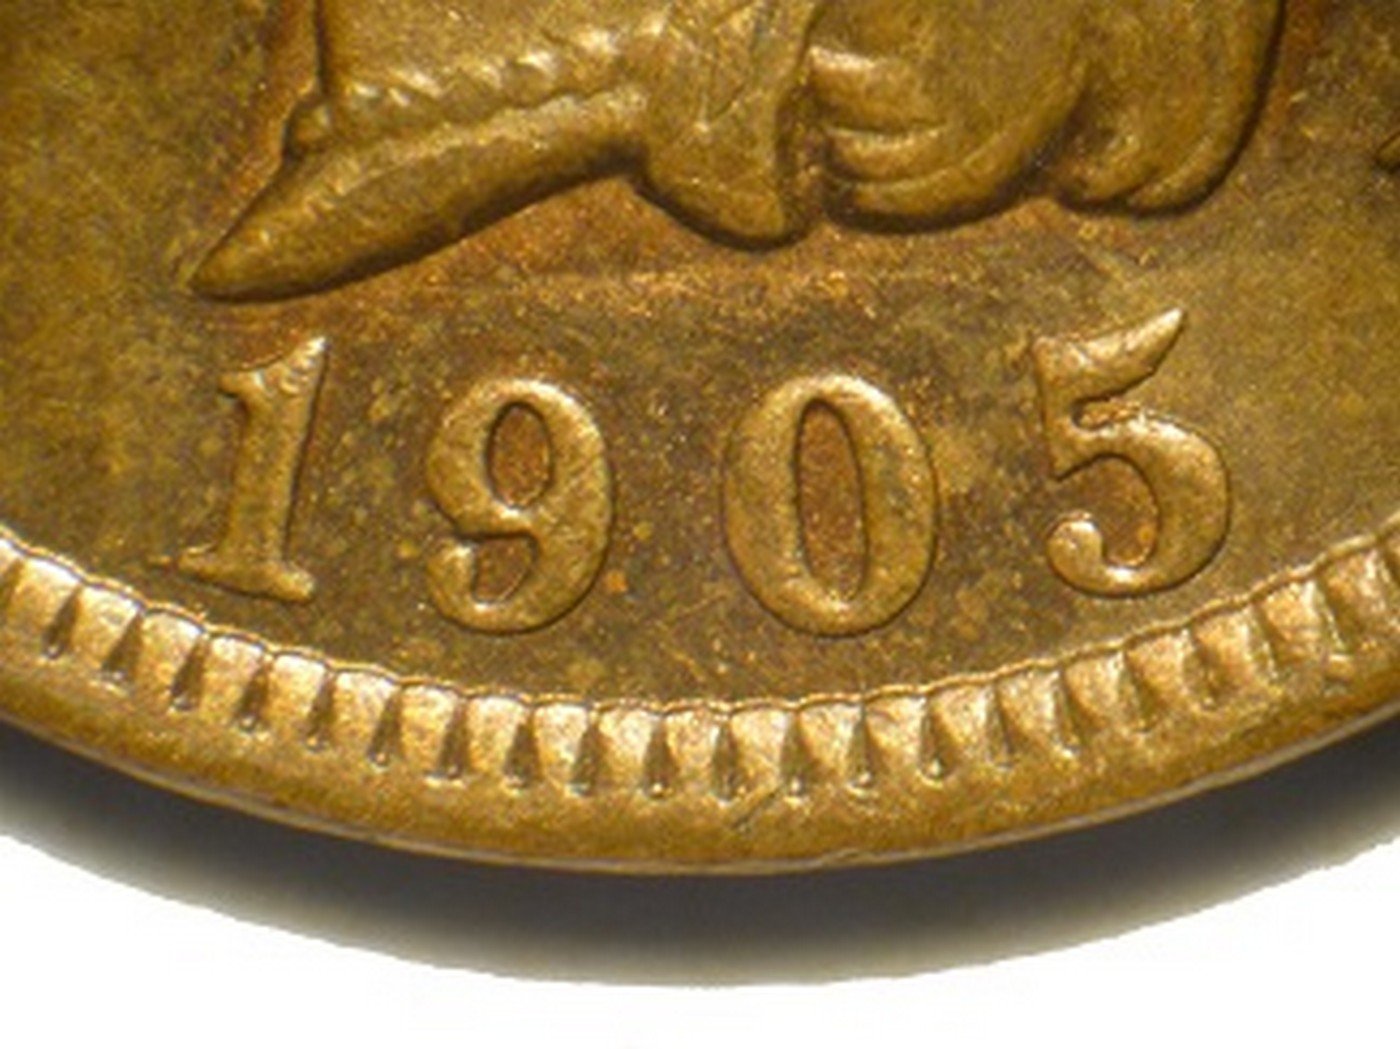 1905 RPD-020 - Indian Head Penny - Photo by David Poliquin